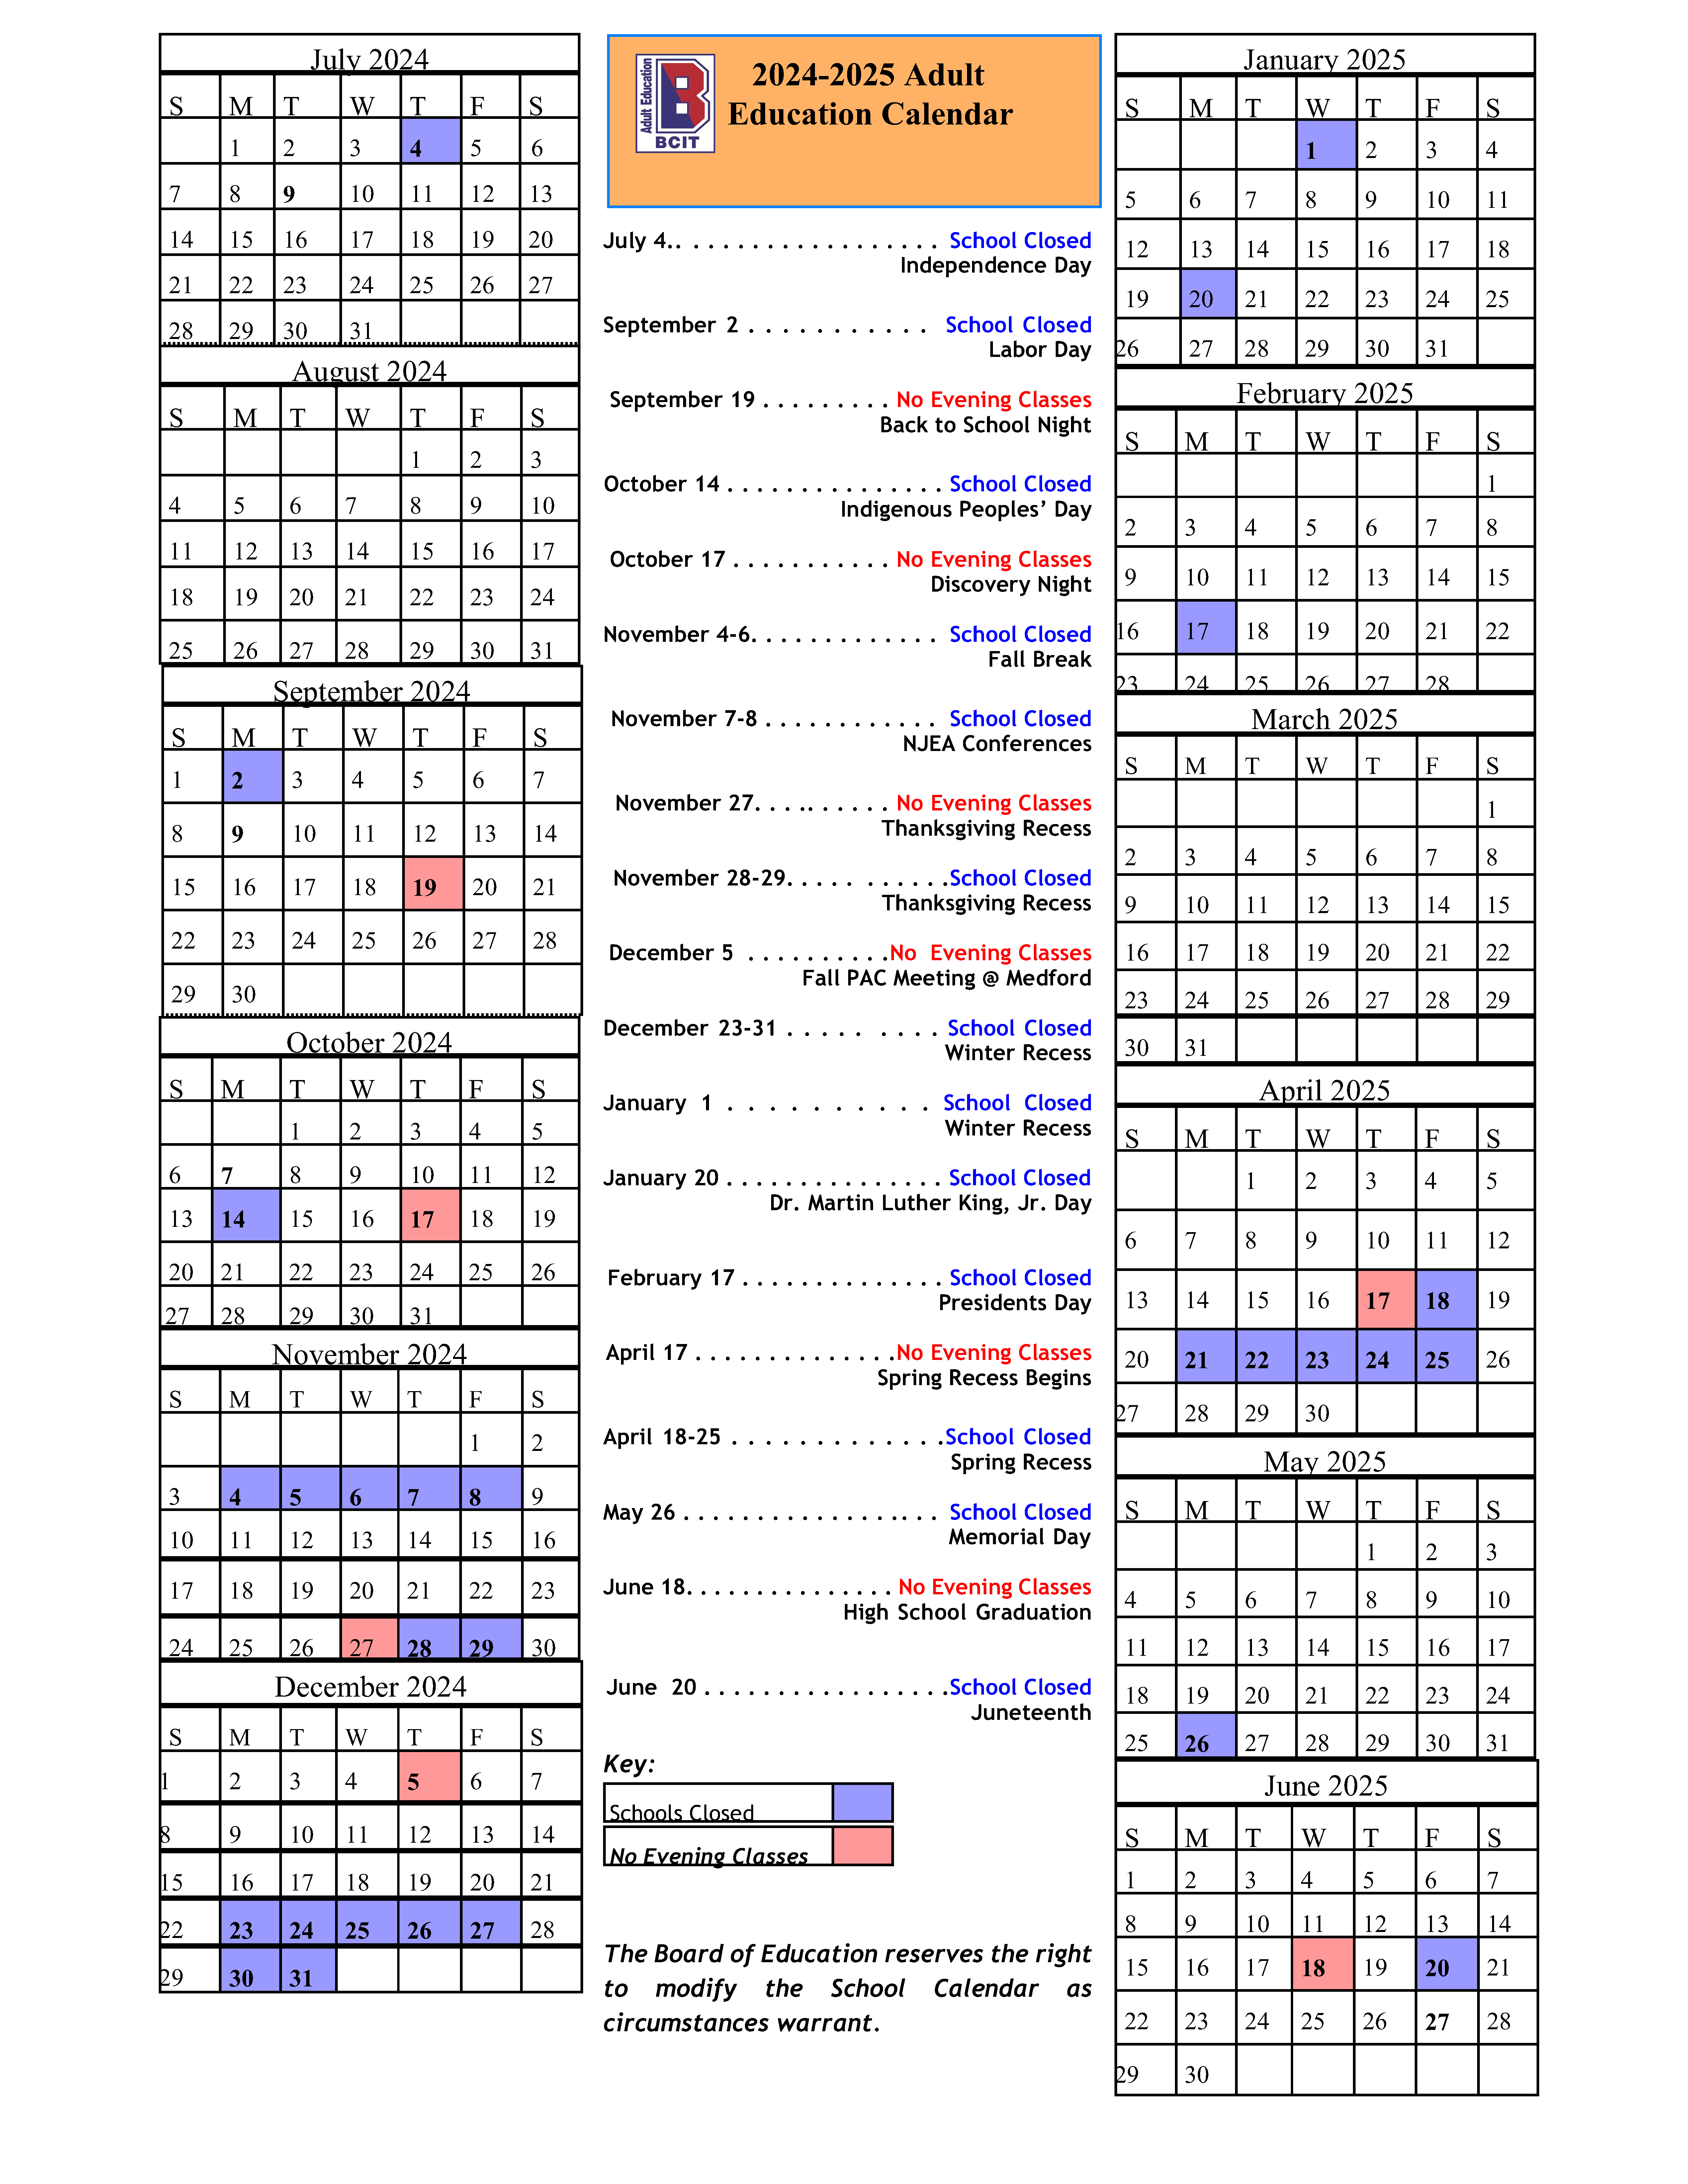 Adult Education Calendar, White background, red and blue boxes